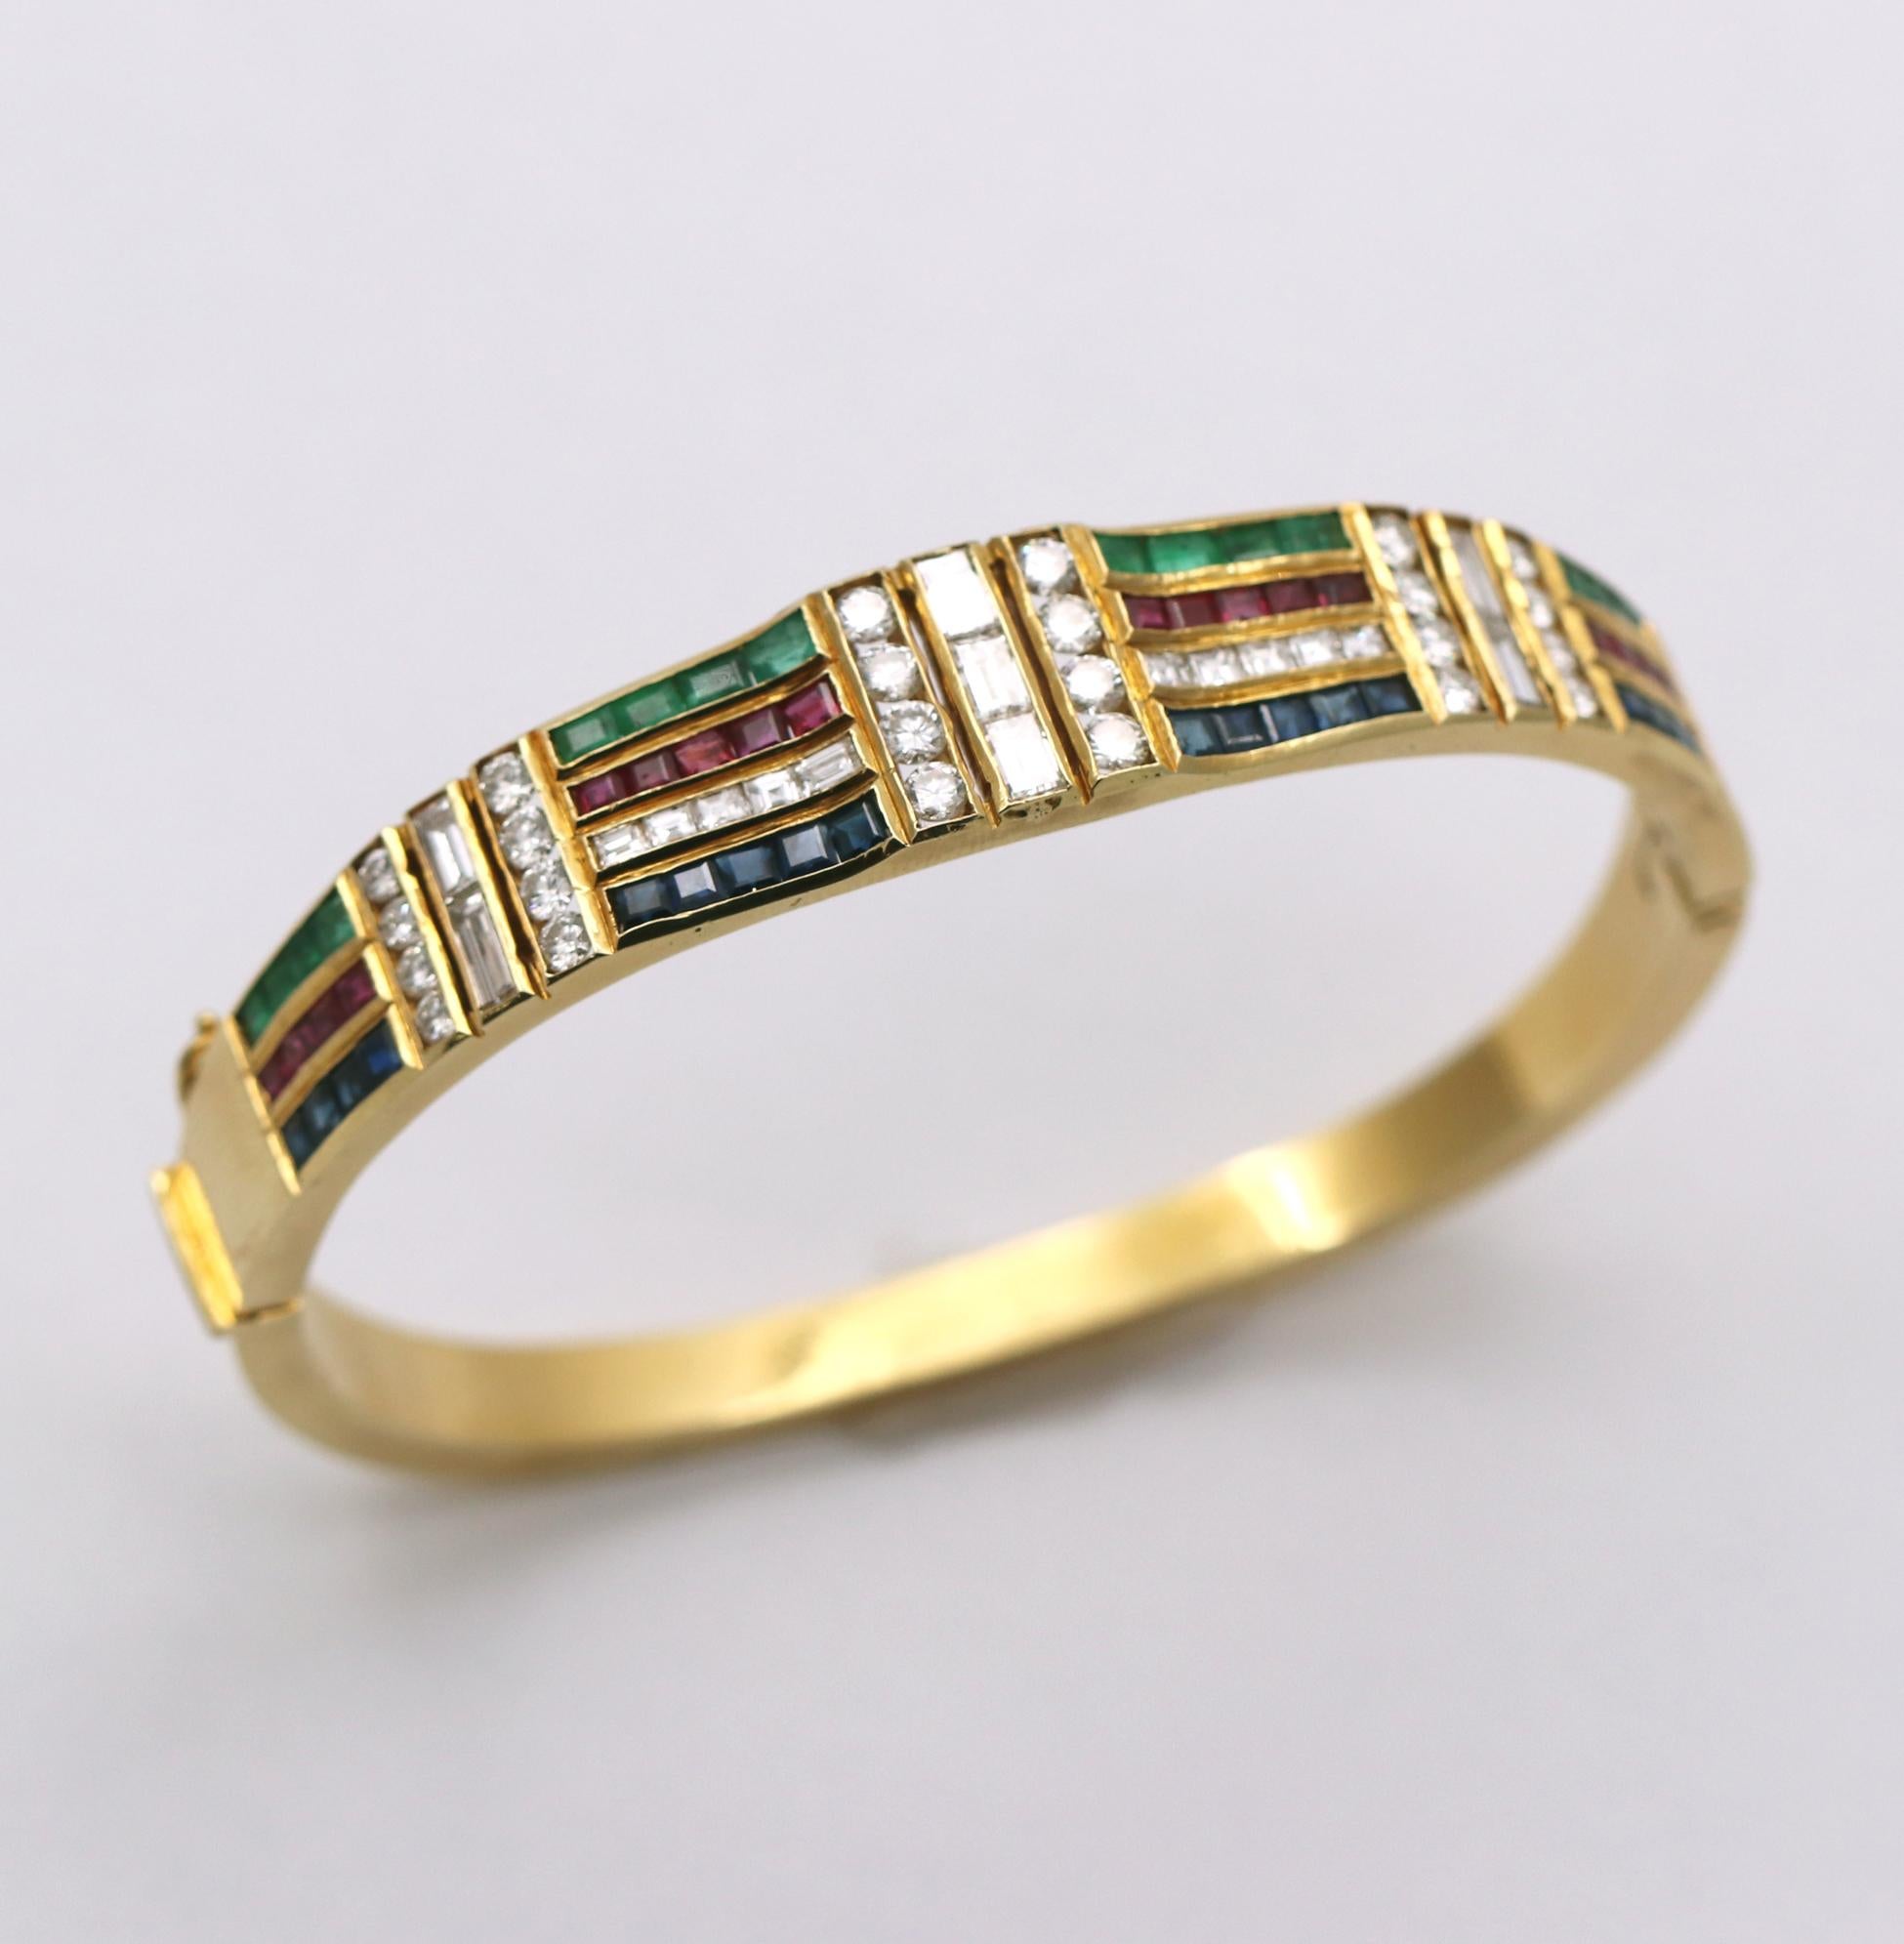 Bangle Bracelet with a Rainbow of Colored Stones and Diamonds 1